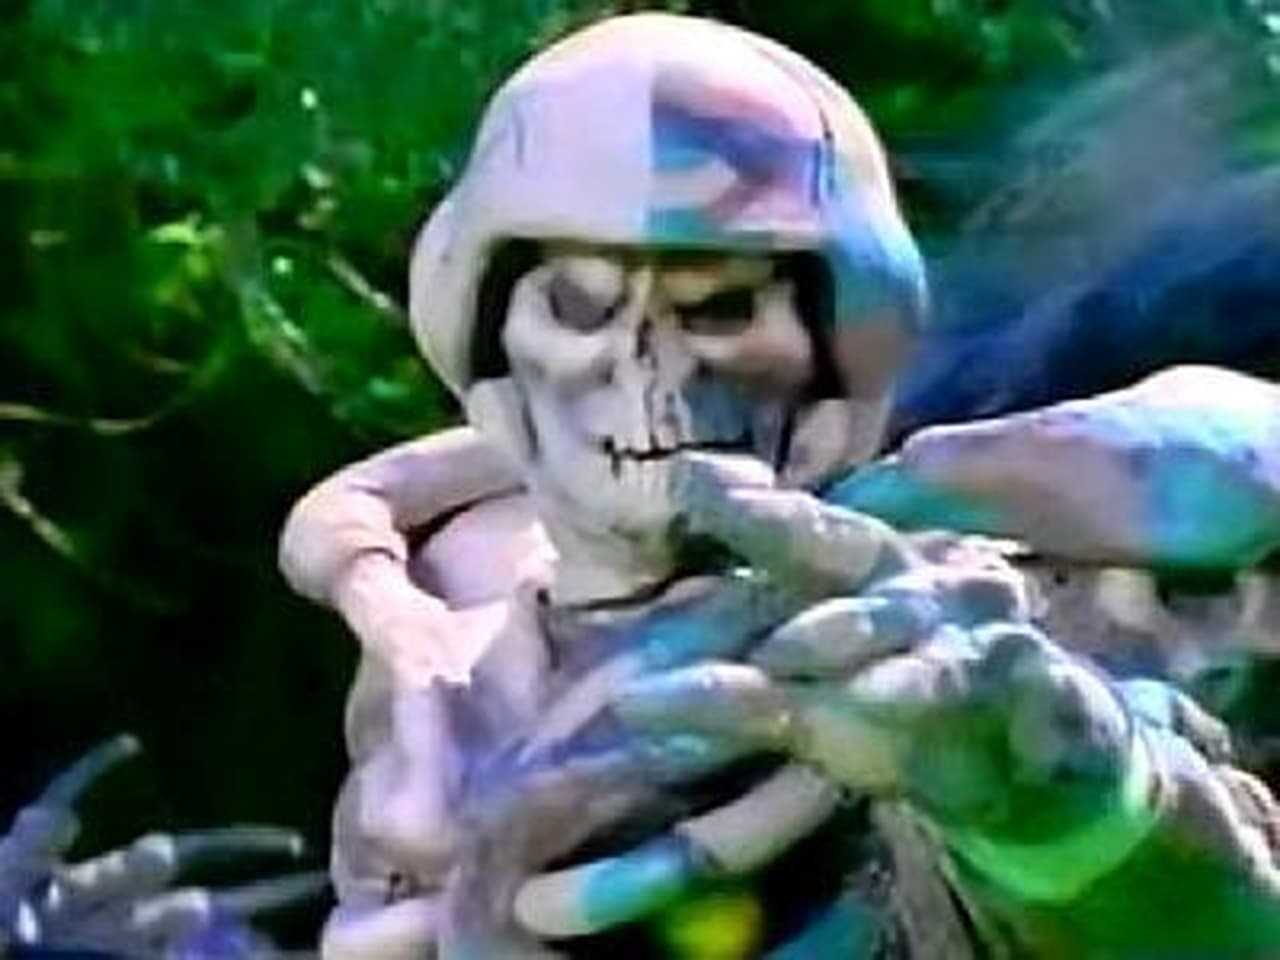 Power Rangers - Season 3 Episode 22 : A Different Shade of Pink (1)